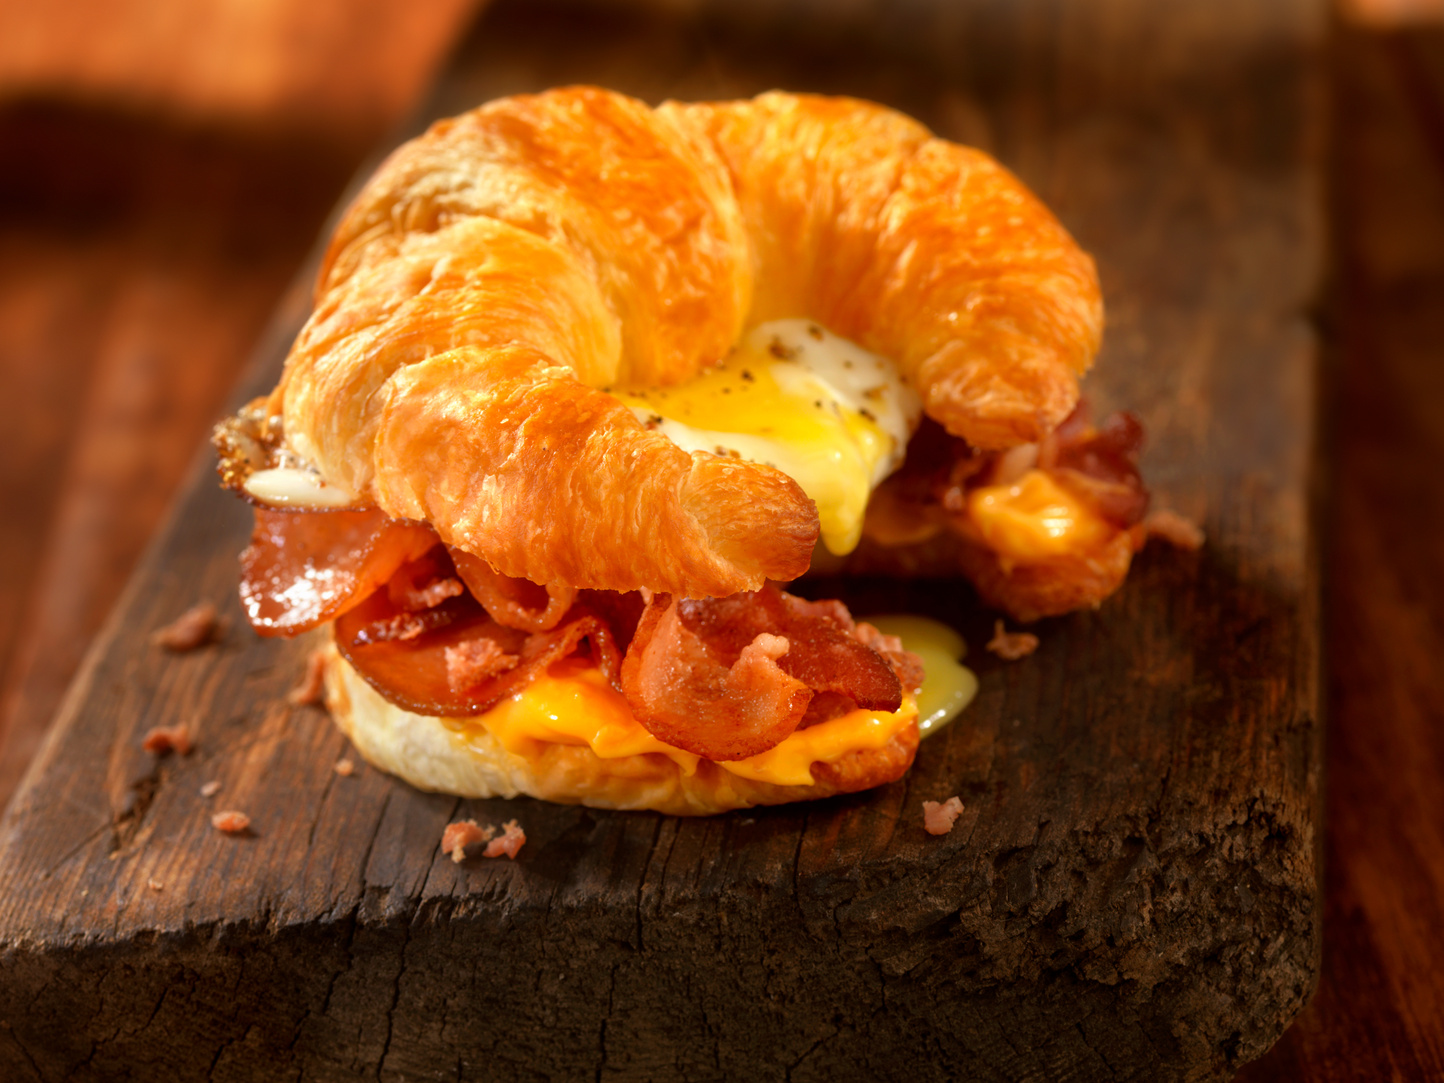 Croissant Breakfast Sandwich with Bacon,egg and Cheese